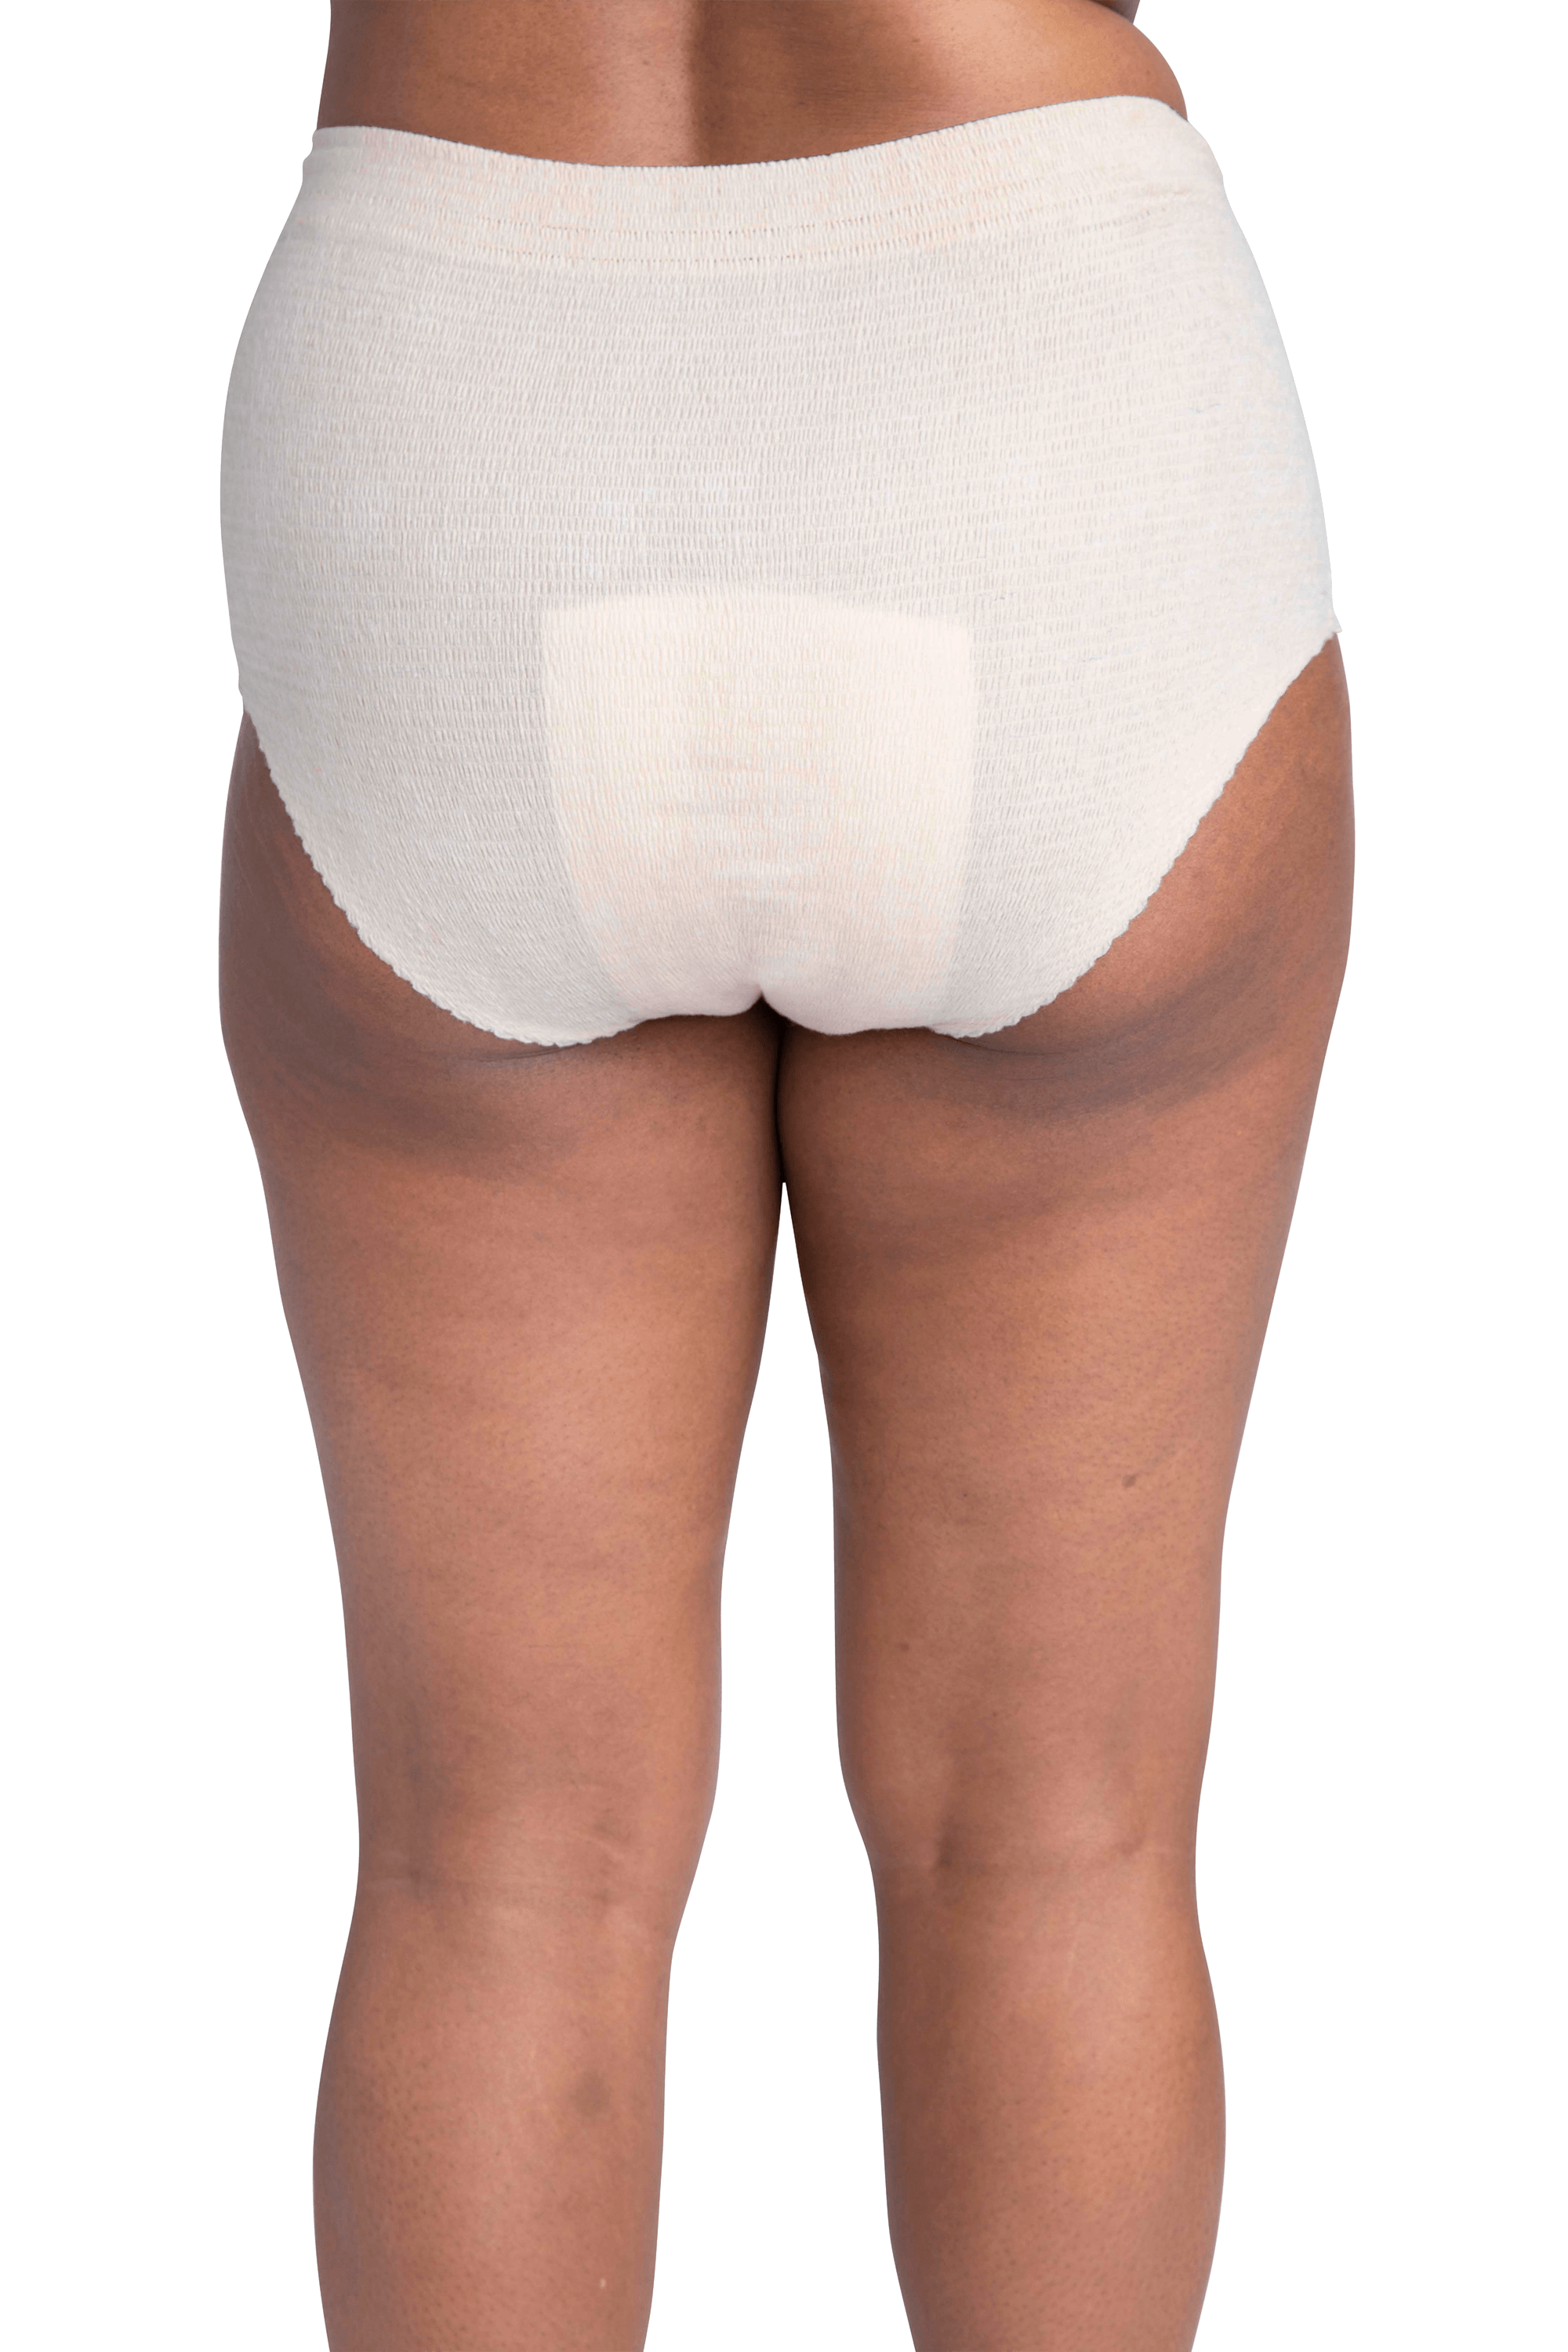 Unisex Protective Underwear, Trial Pack